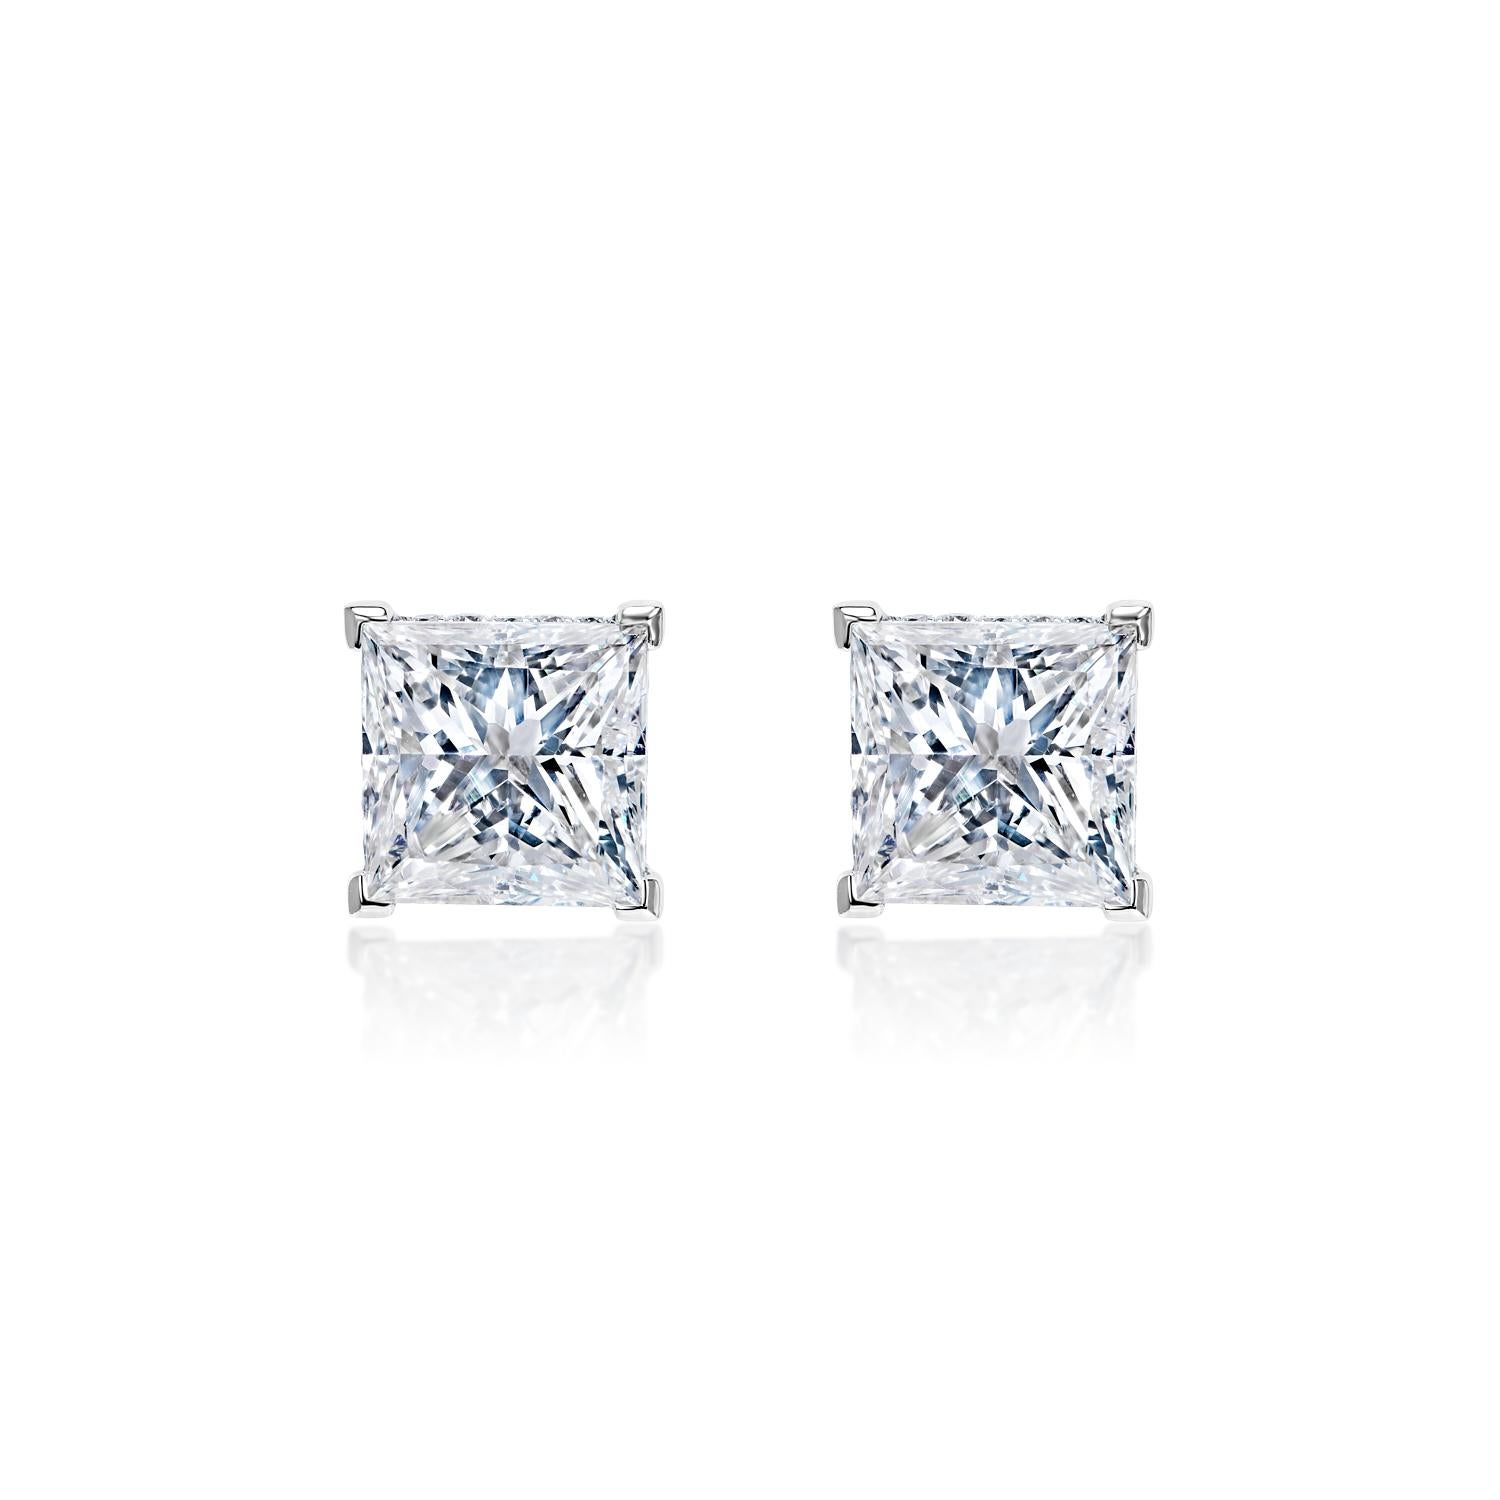 Addilyn 14 Carats G - F VS2 Princess Cut Diamond Stud Earrings in Platinum


Feather Filled- Spl Care Req'd

Left Stone:

Carat Weight: 6.67 Carats
Color: G
Clarity: VS2
Style: Princess Cut

Right Stone:

Carat Weight: 5.88 Carats
Color: F
Clarity: